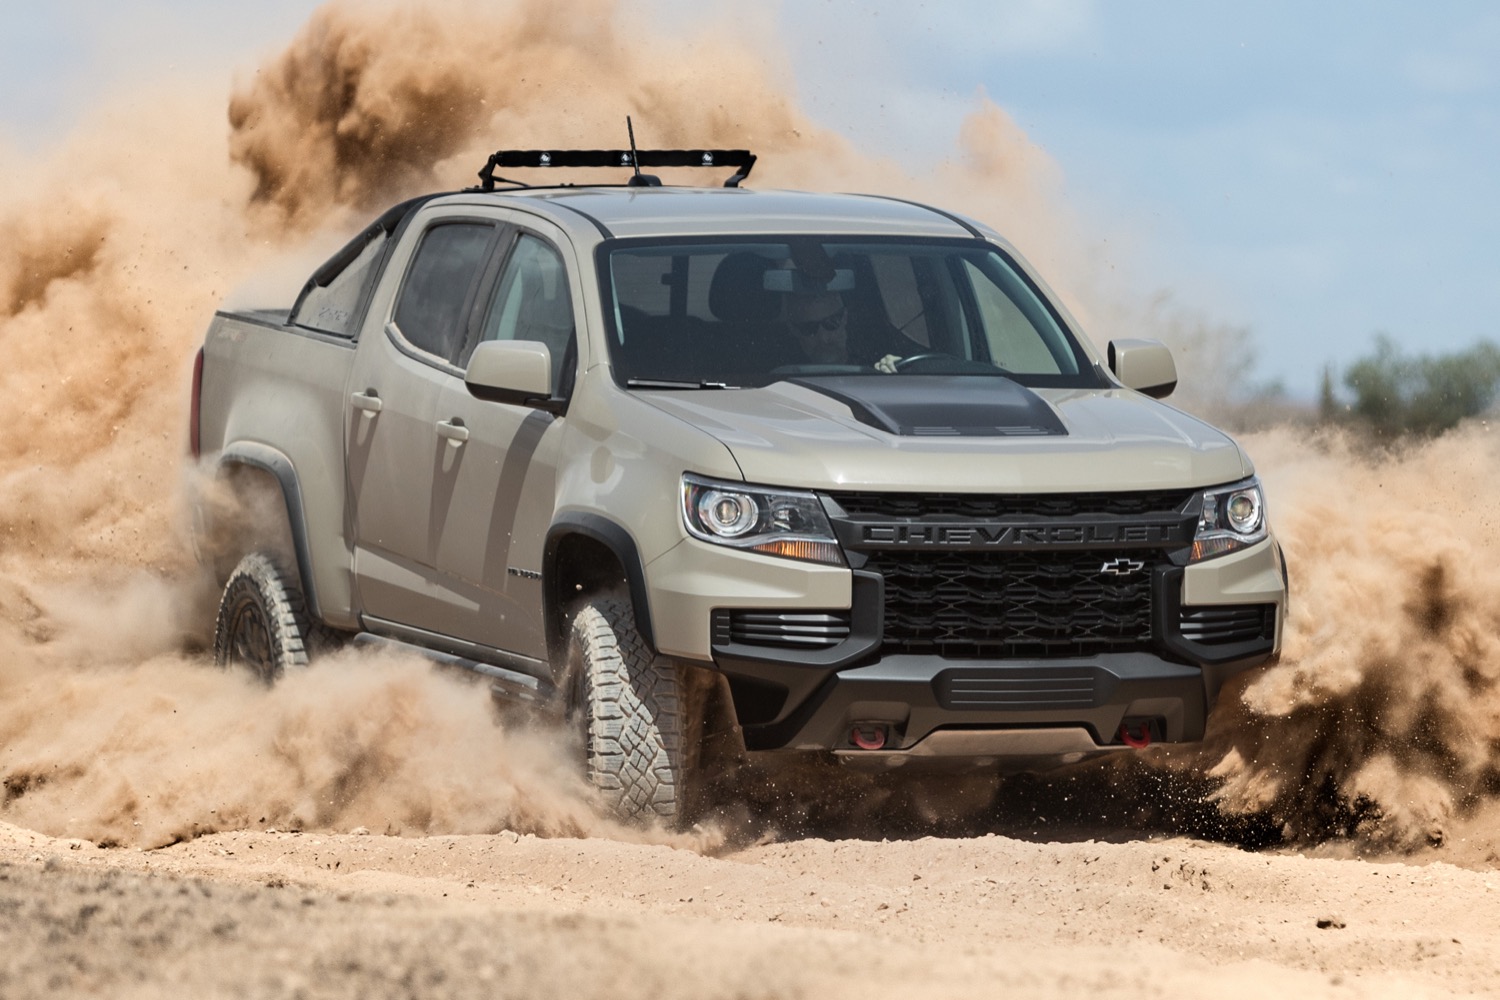 Take A Look At Chevy's 2021 Colorado Lineup | GM Authority